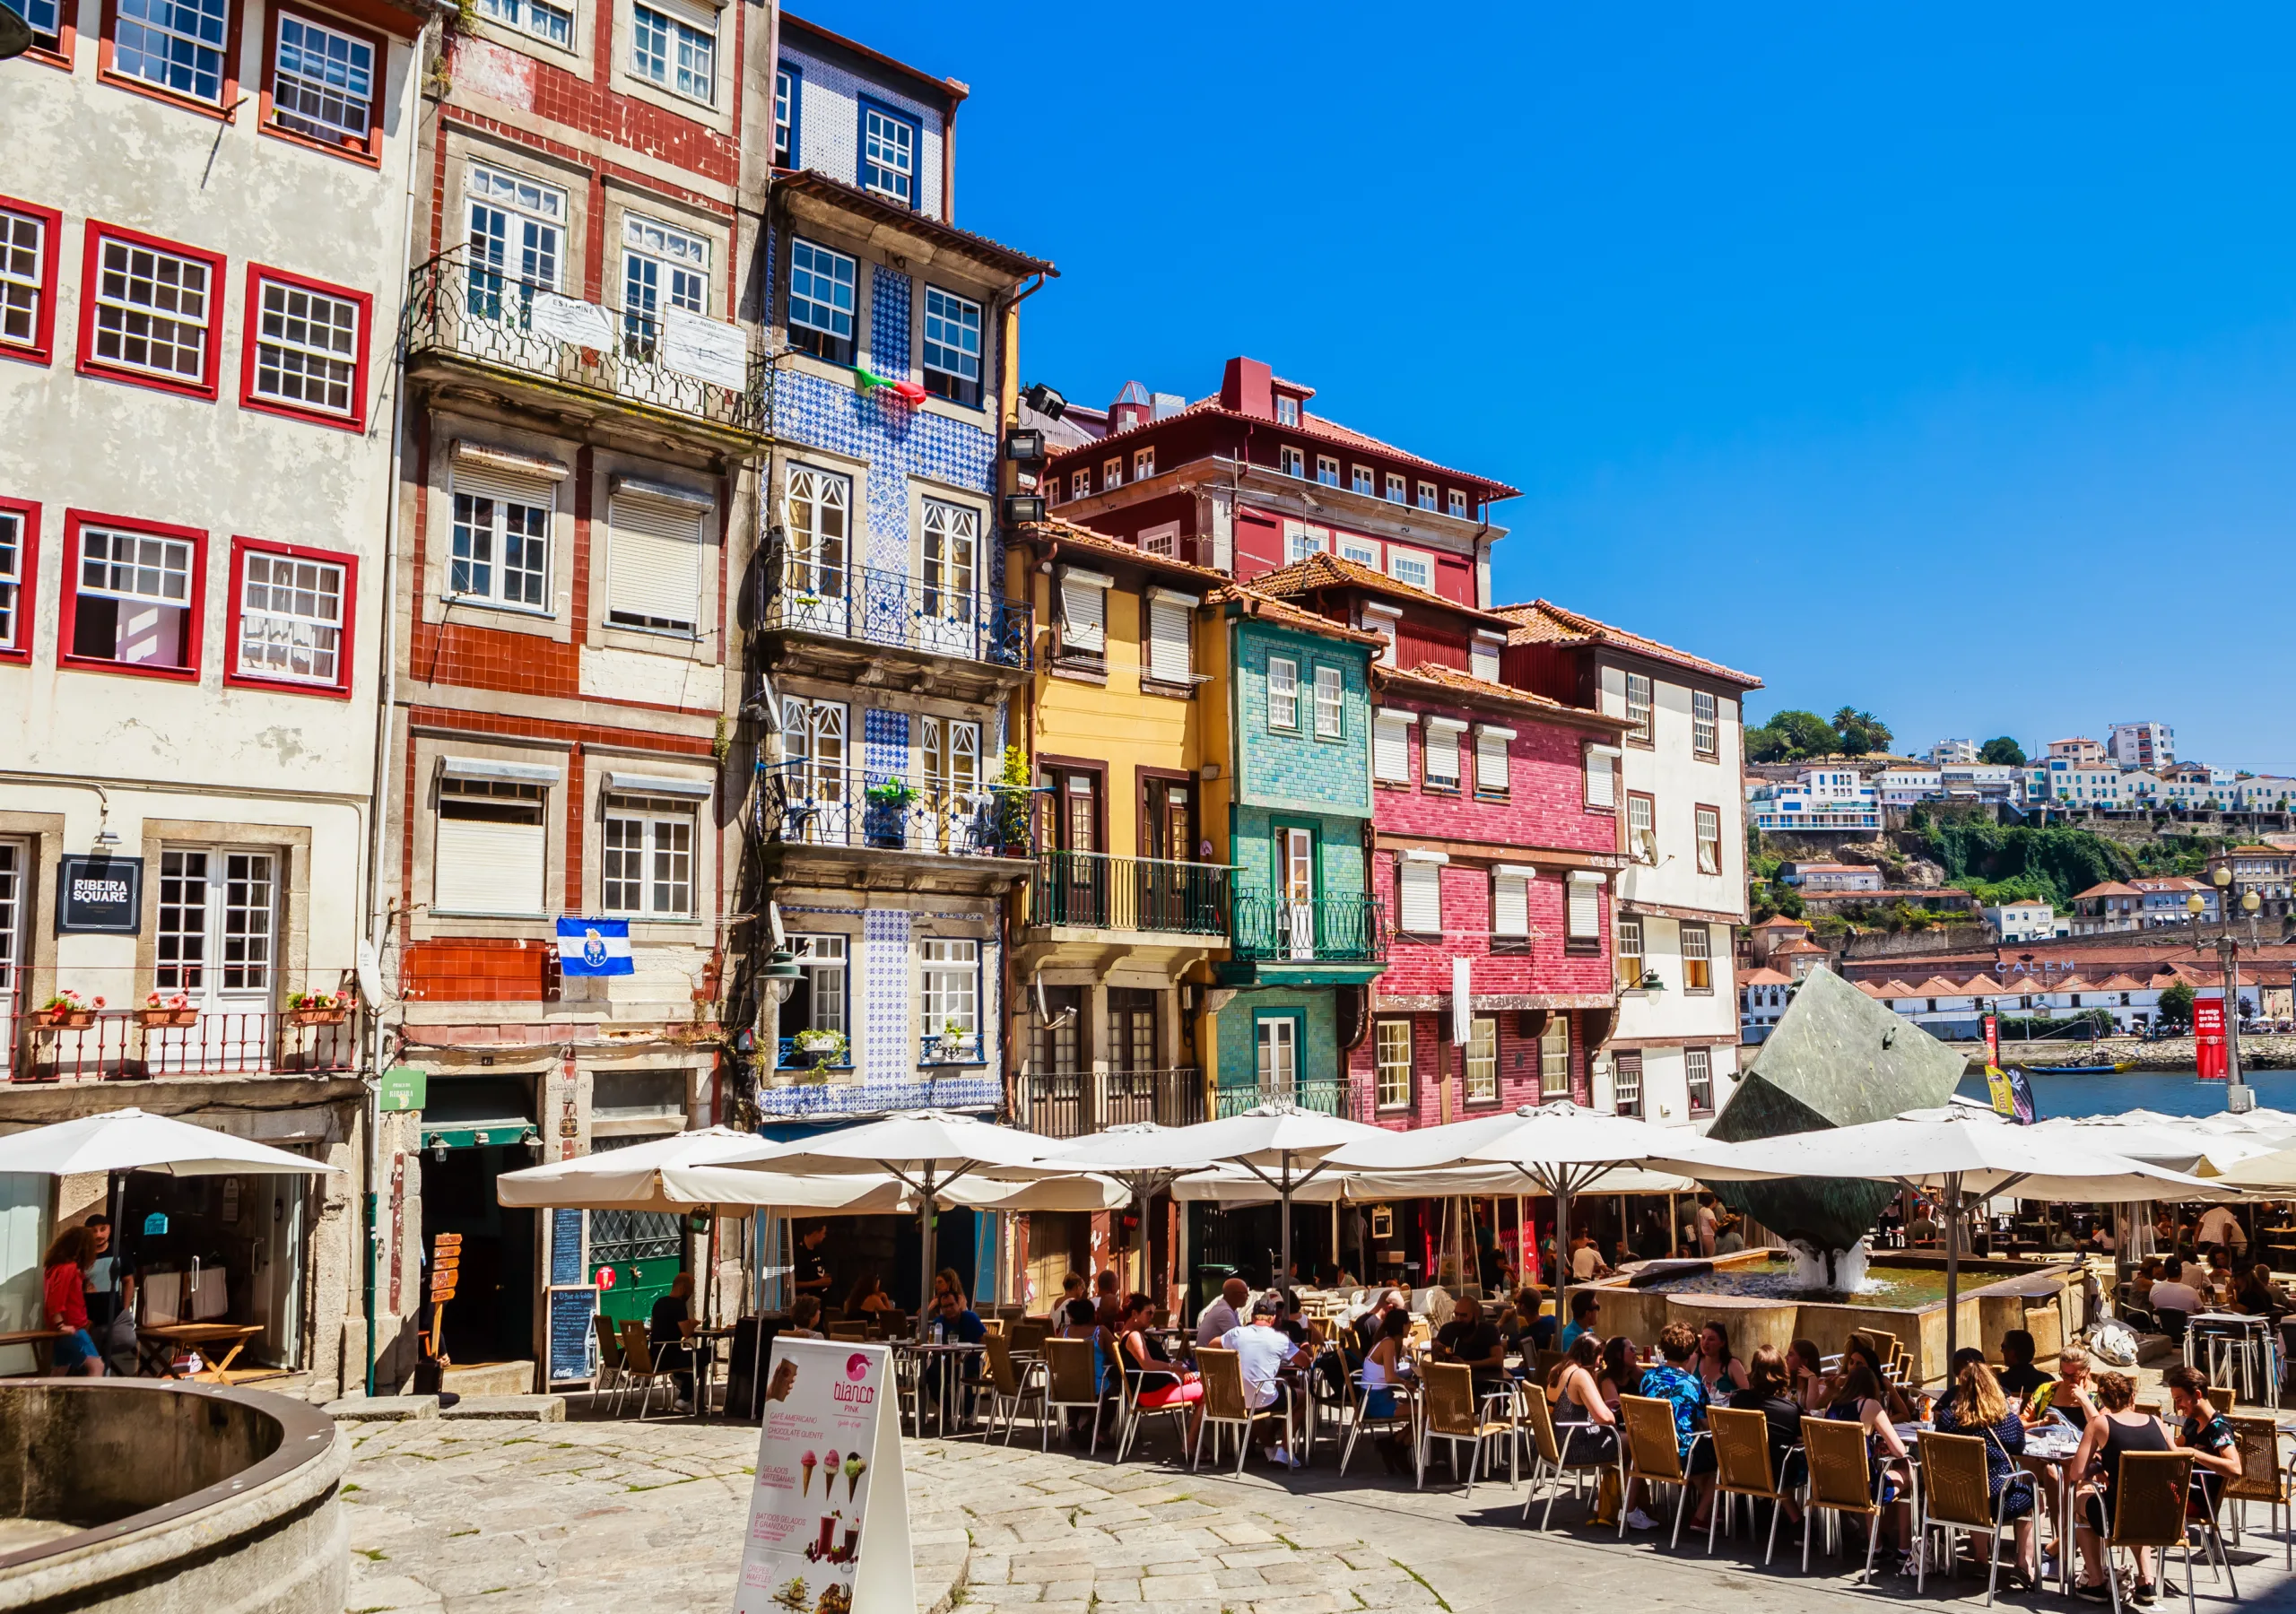 People sitting and eating in the Ribeira Square